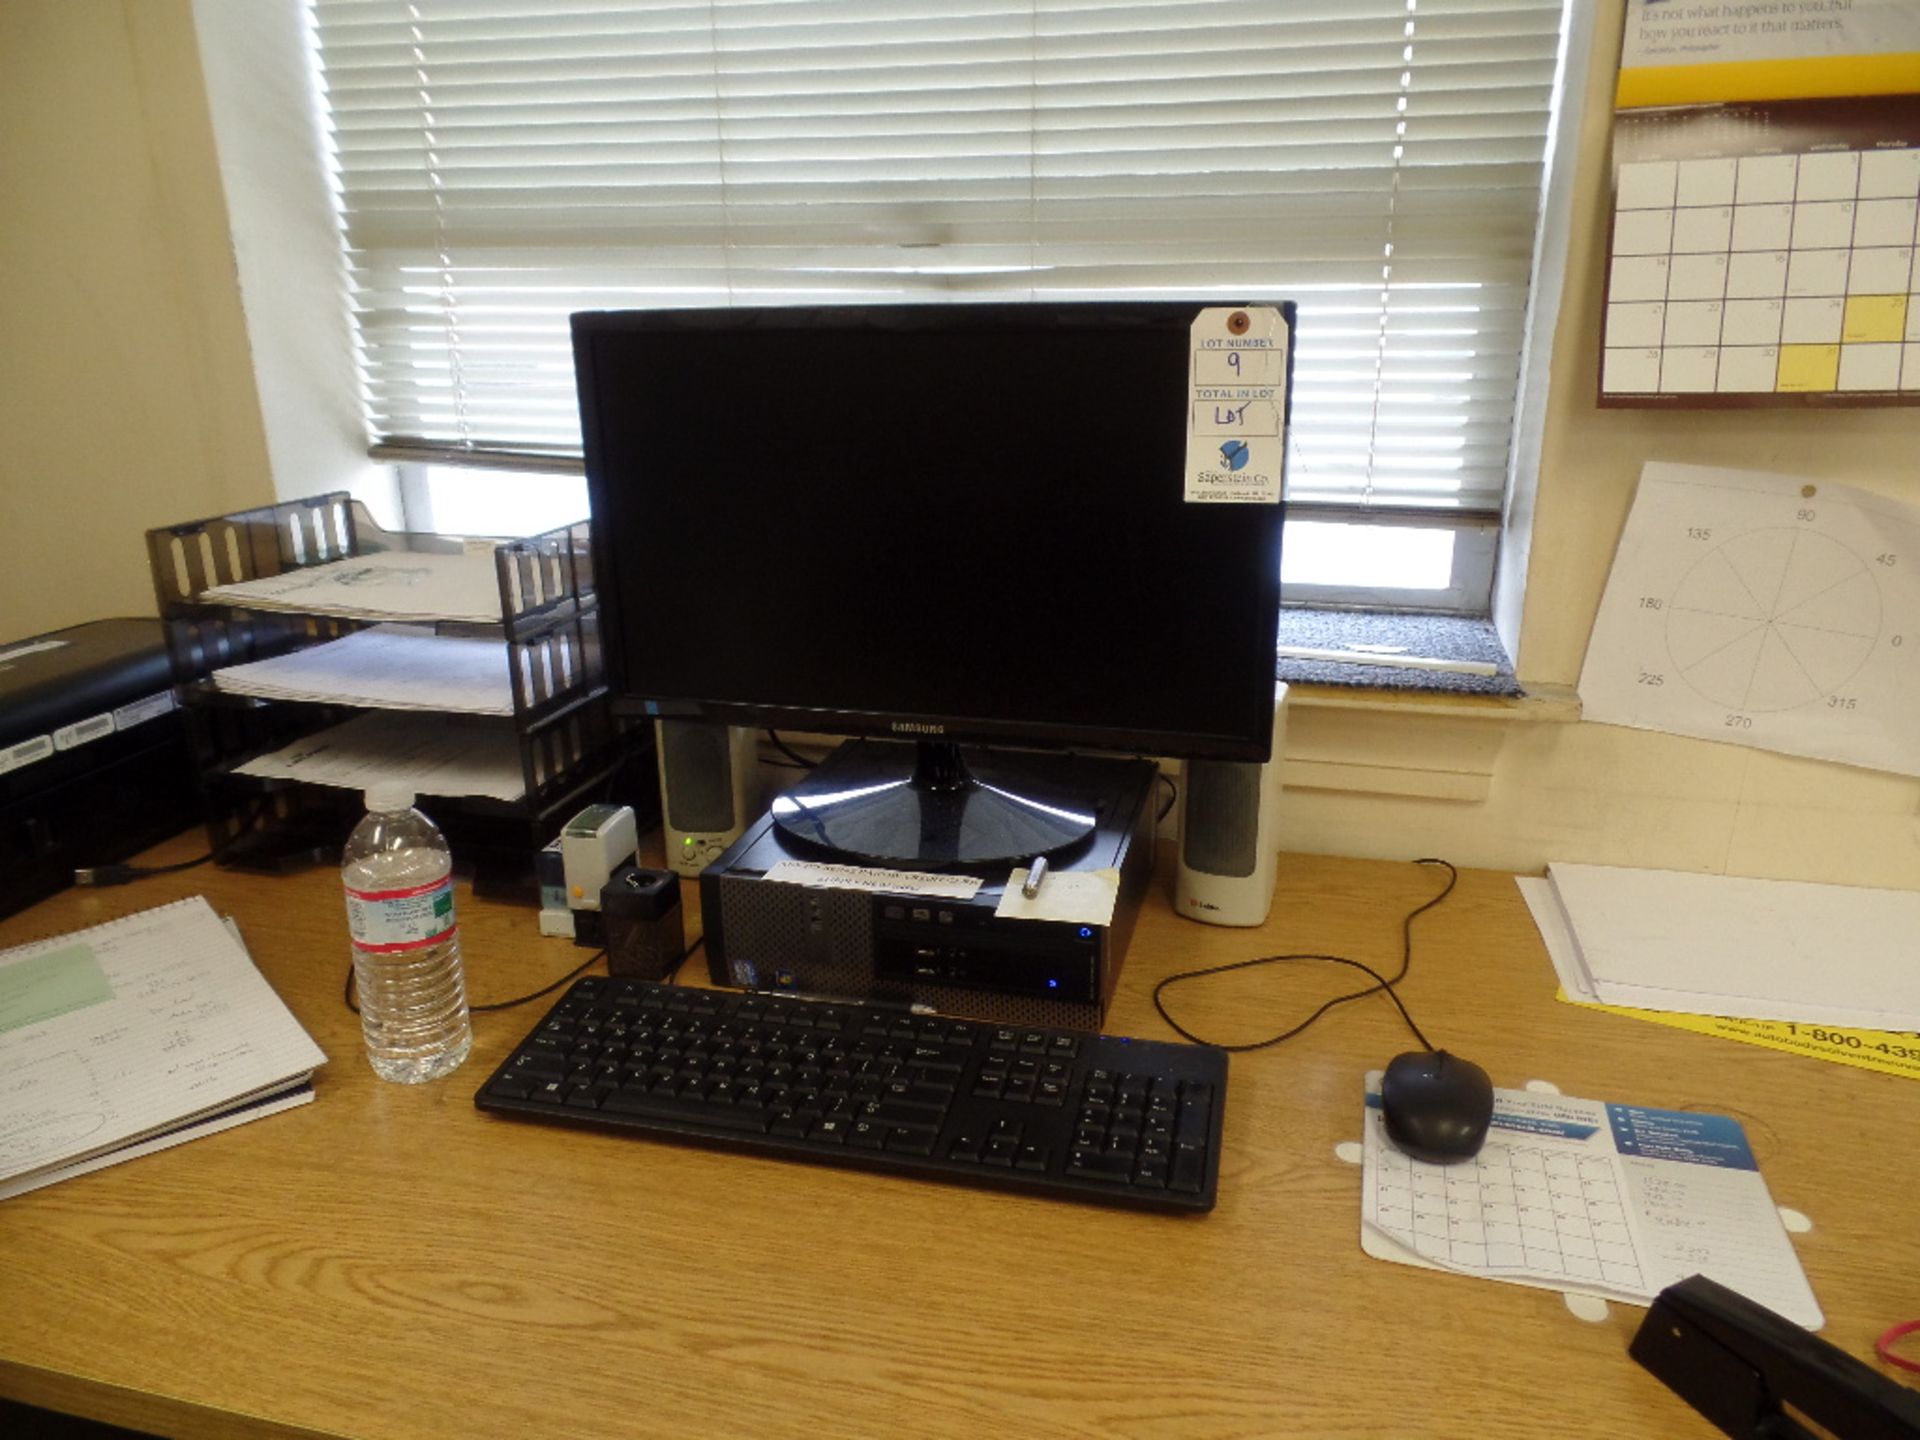 {LOT} Asst. Office Electronics c/o 2 PC's, 2 Monitors, 3 Printers, Shredder, Brother P-Touch & 2